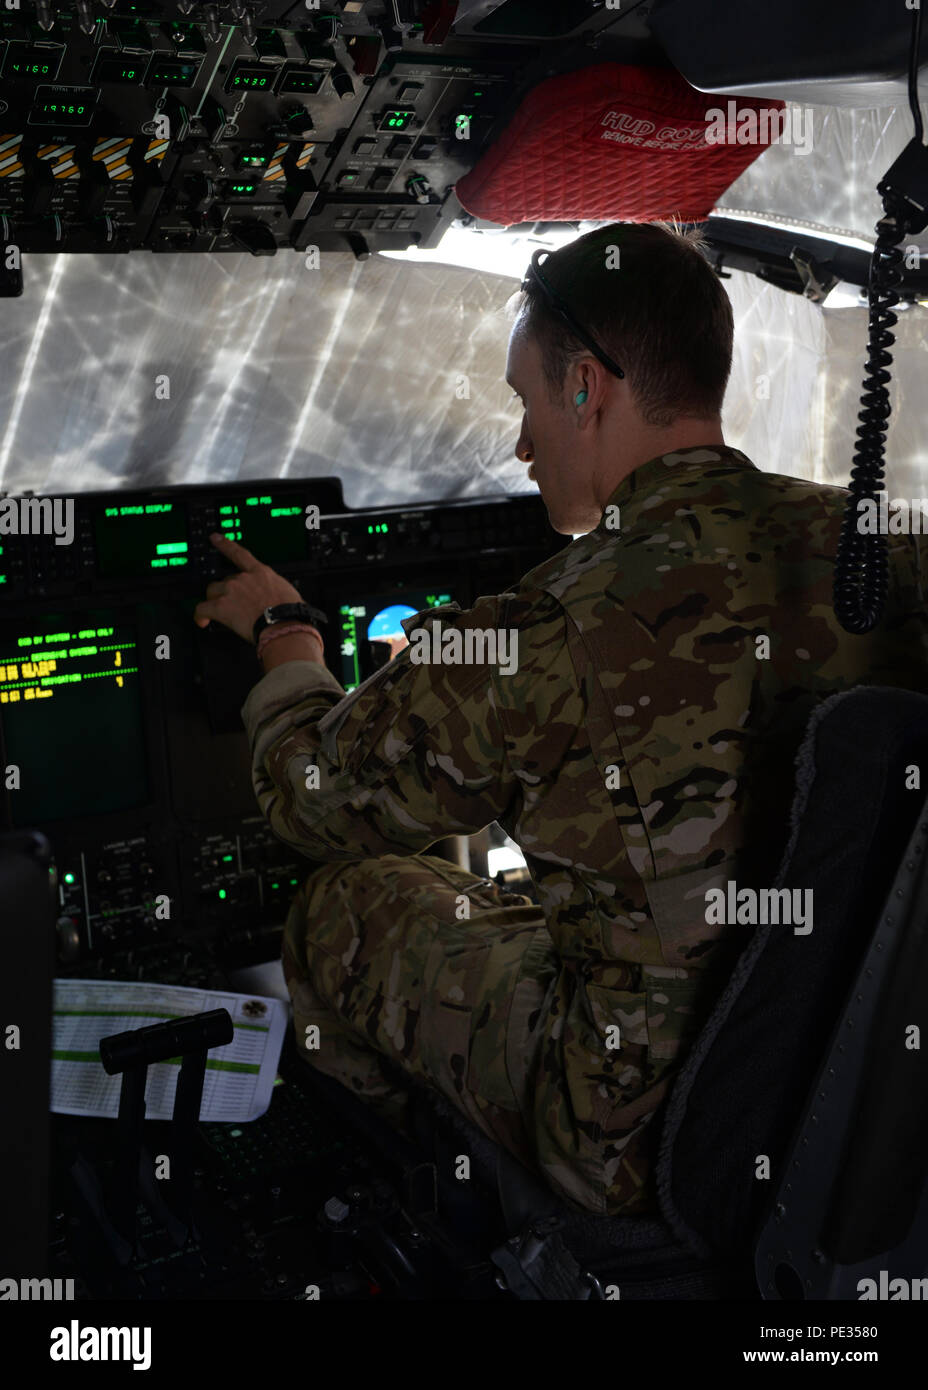 U.S. Air Force Capt. Matt Buchholtz, 774th Expeditionary Airlift Squadron C-130J Super Hercules pilot, turns on controls before getting ready for takeoff Sept. 3, 2015, at Bagram Air Field, Afghanistan. Buchholtz and his team, who are deployed from Little Rock Air Force Base, Ark., fly various combat missions throughout Afghanistan supporting missions ranging from medical evacuations to cargo and passenger transports. (U.S. Air Force photo by Senior Airman Cierra Presentado/Released) Stock Photo